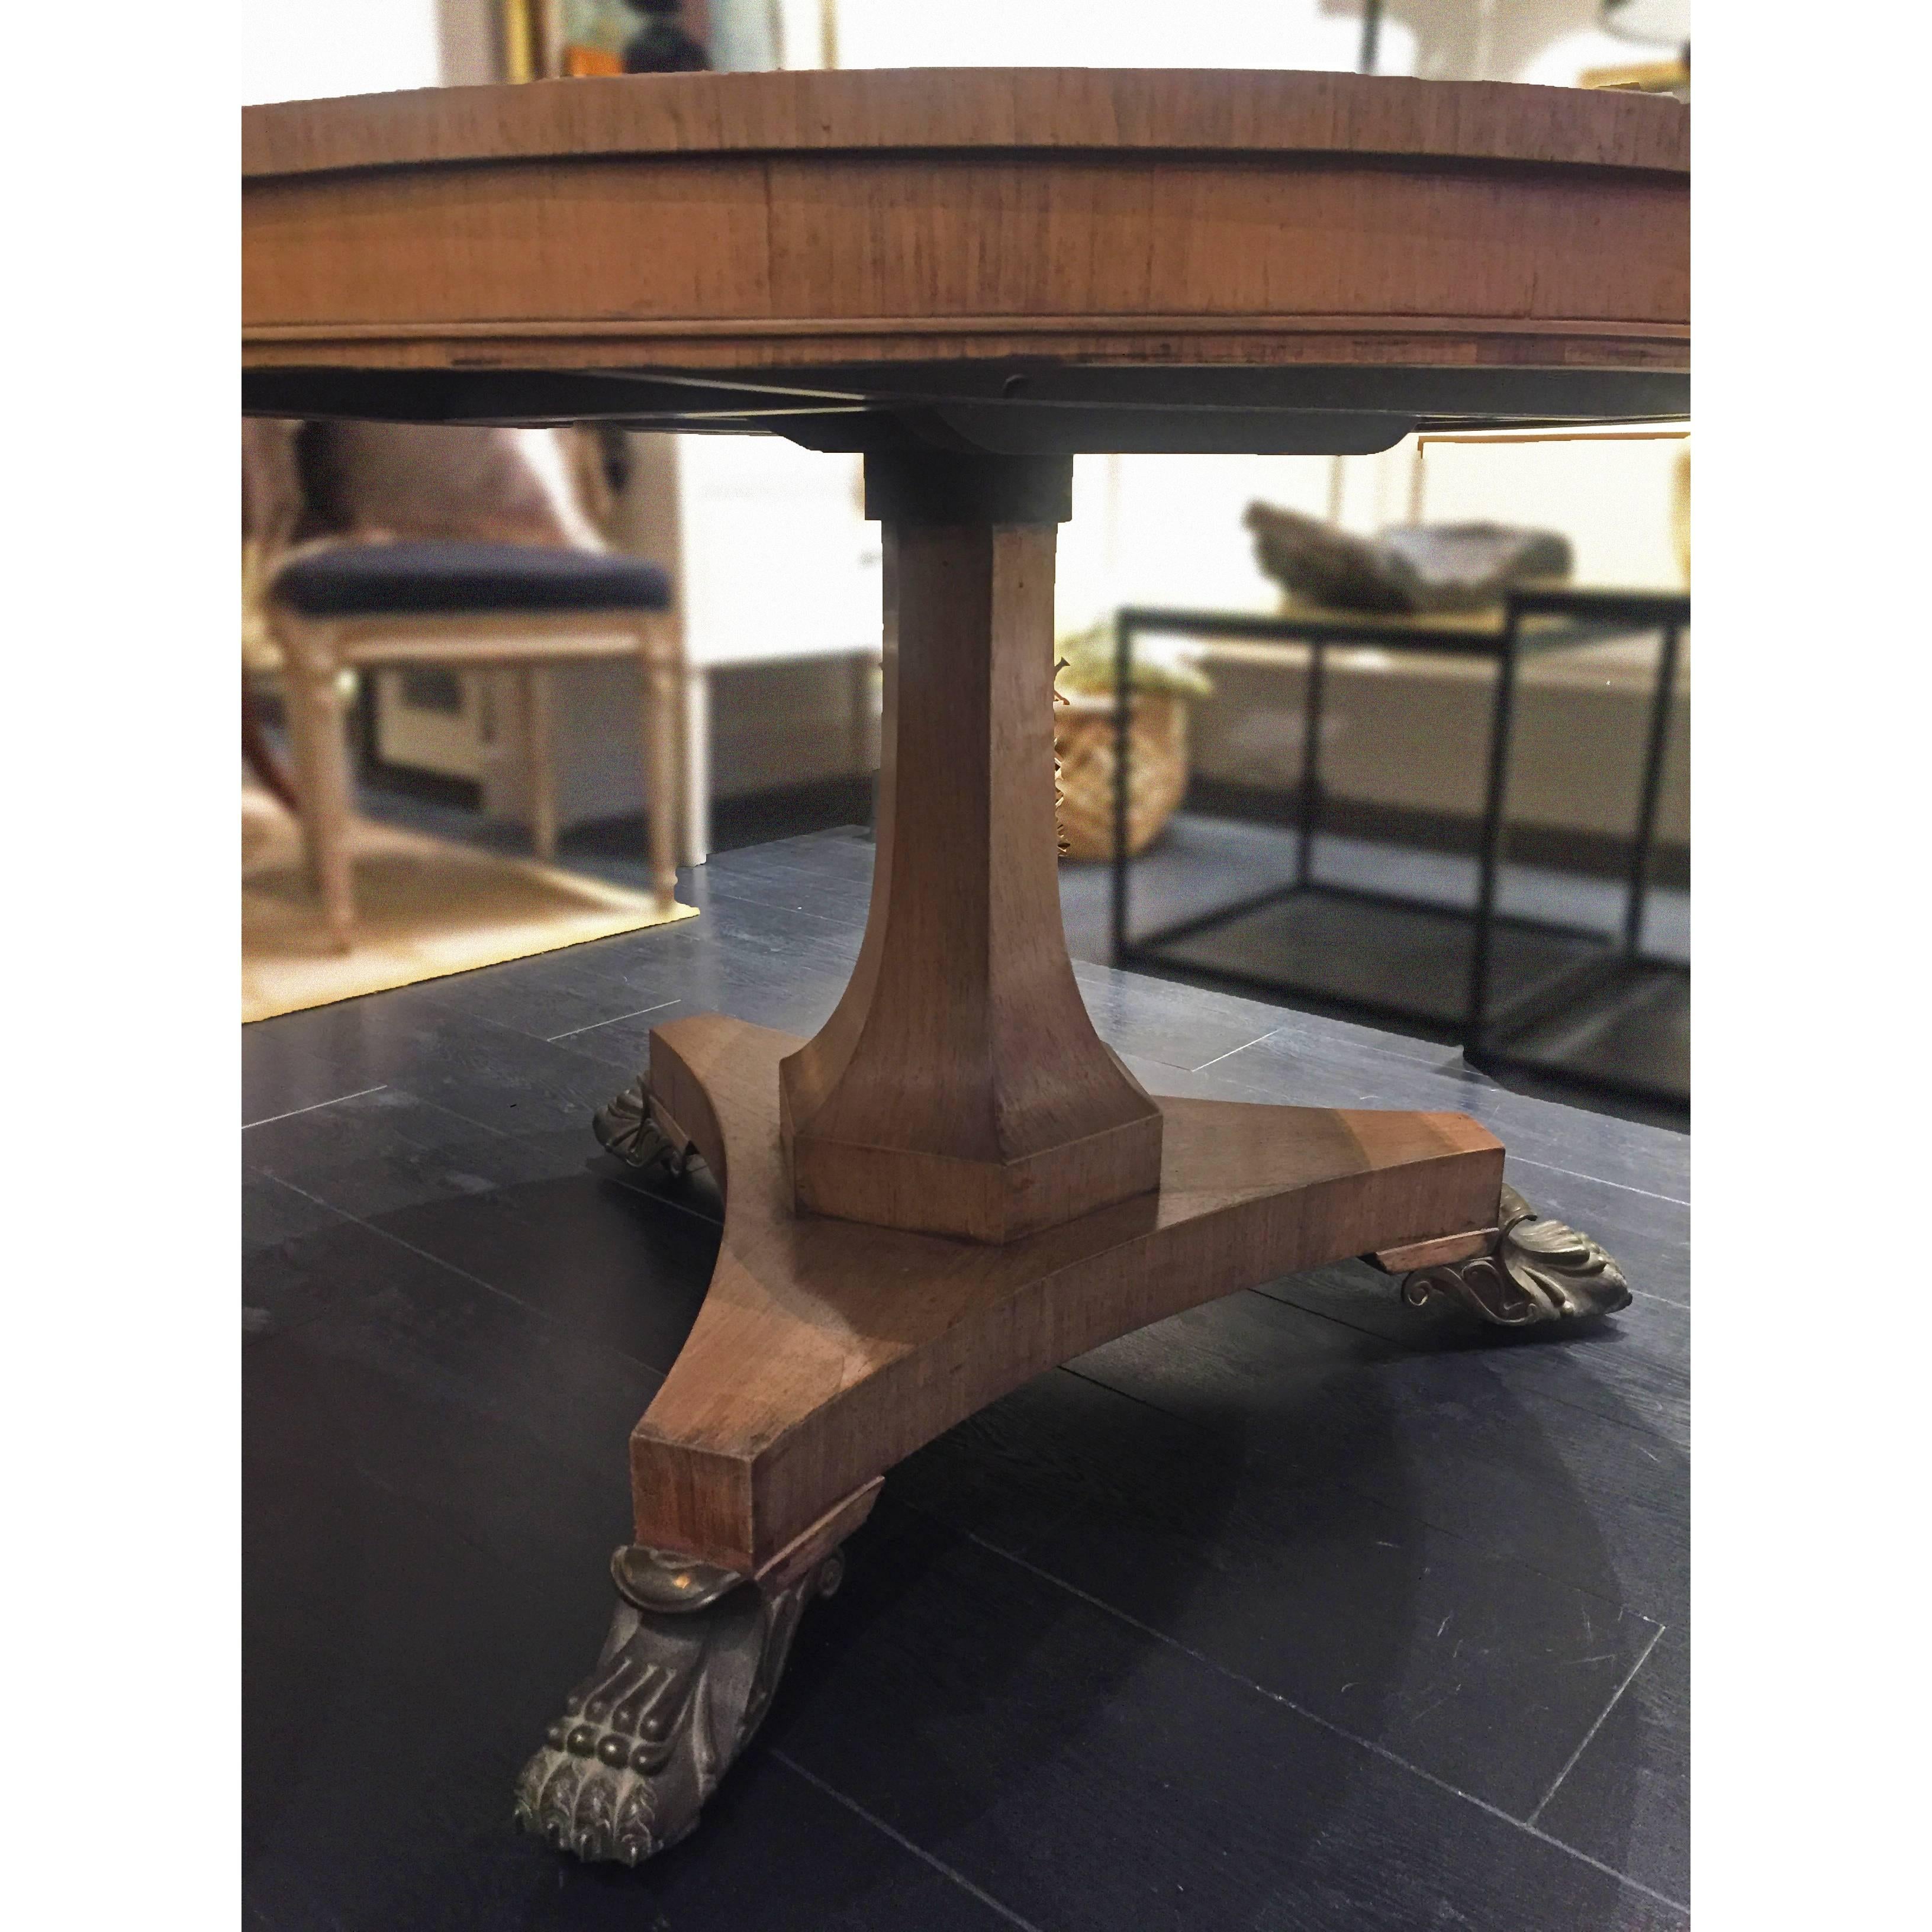 Beautifully crafted Swedish walnut table from 1910 with contrasting iron claw feet.

Good antique condition considering the age